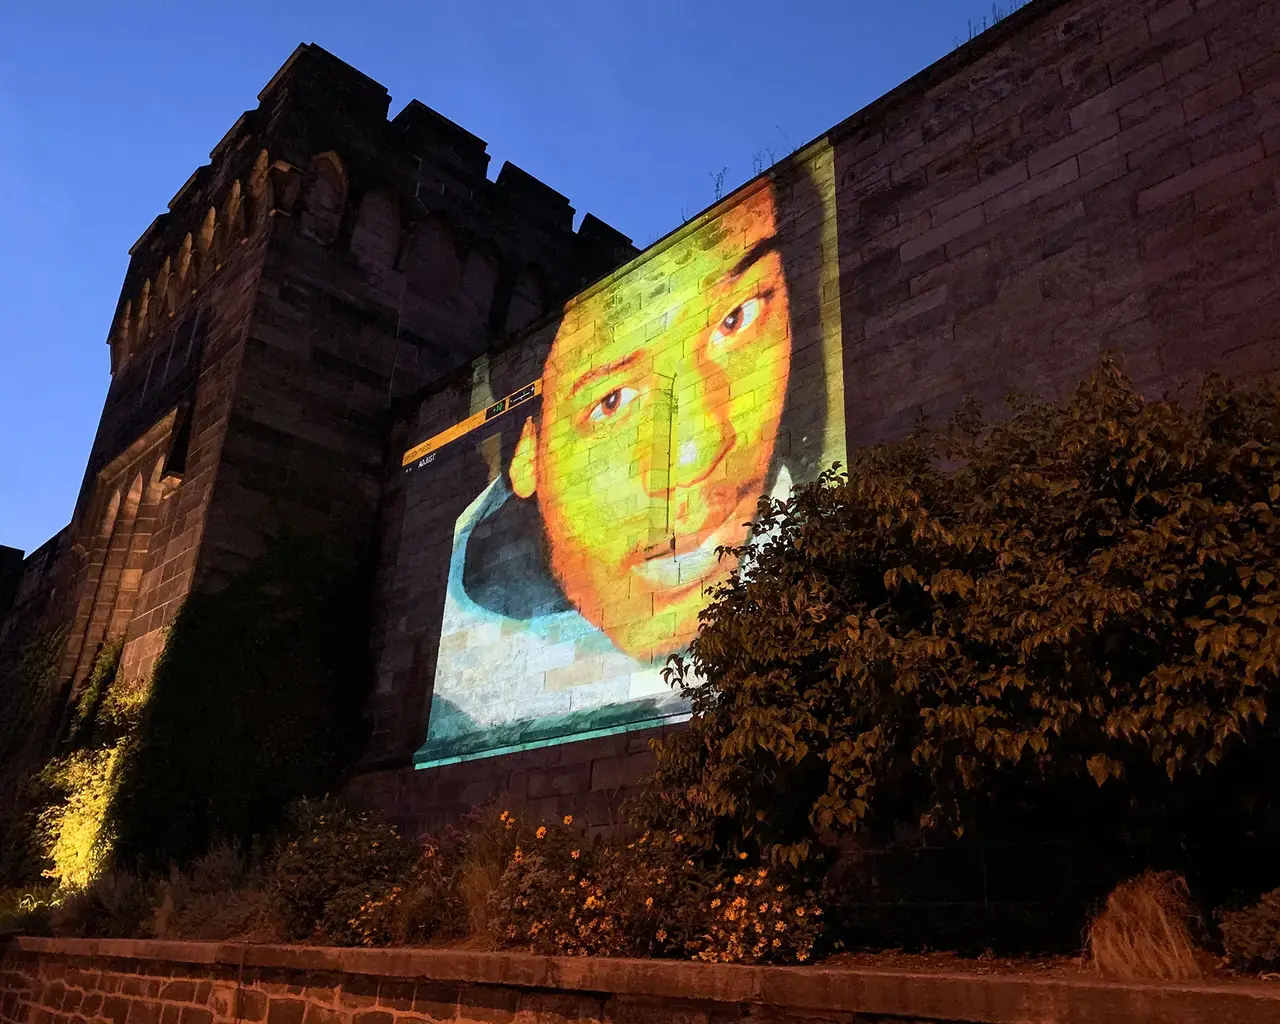 Hidden Lives Illuminated&nbsp;film screening at Eastern State Penitentiary, August 2019. Photo by Jaime Martorana, courtesy of Eastern State Penitentiary Historic Site.&nbsp;